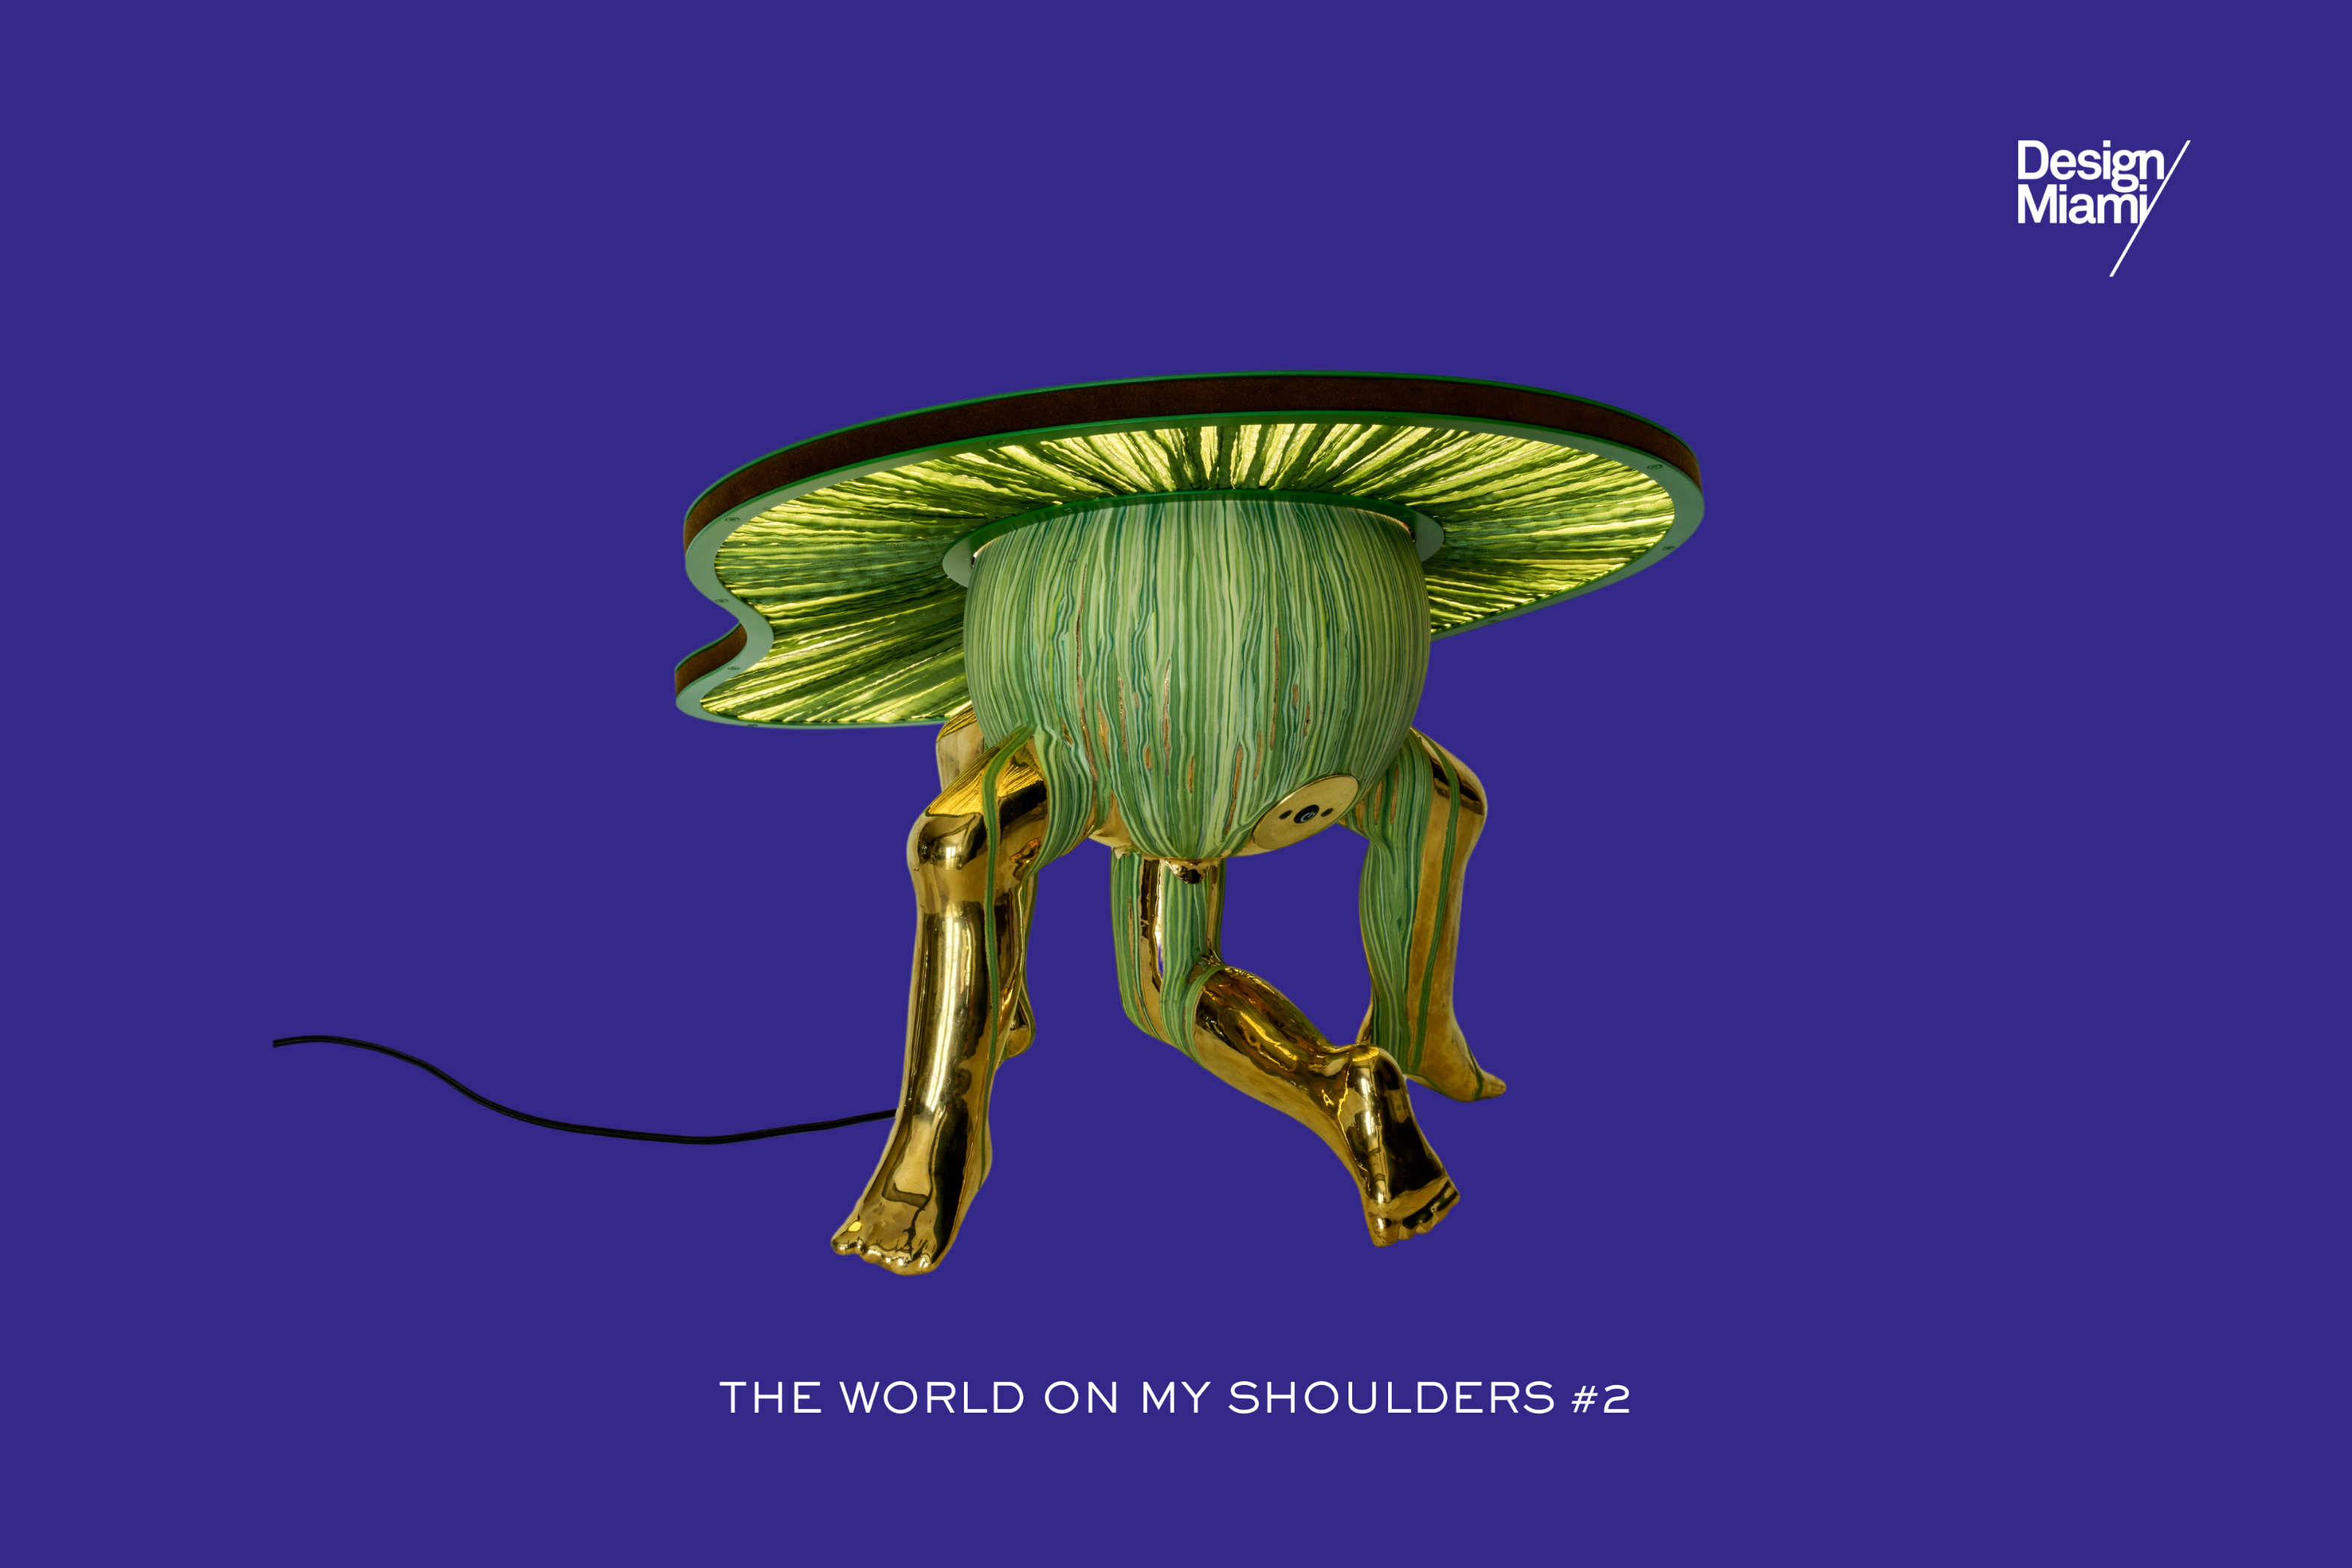 The World on My Shoulders #2